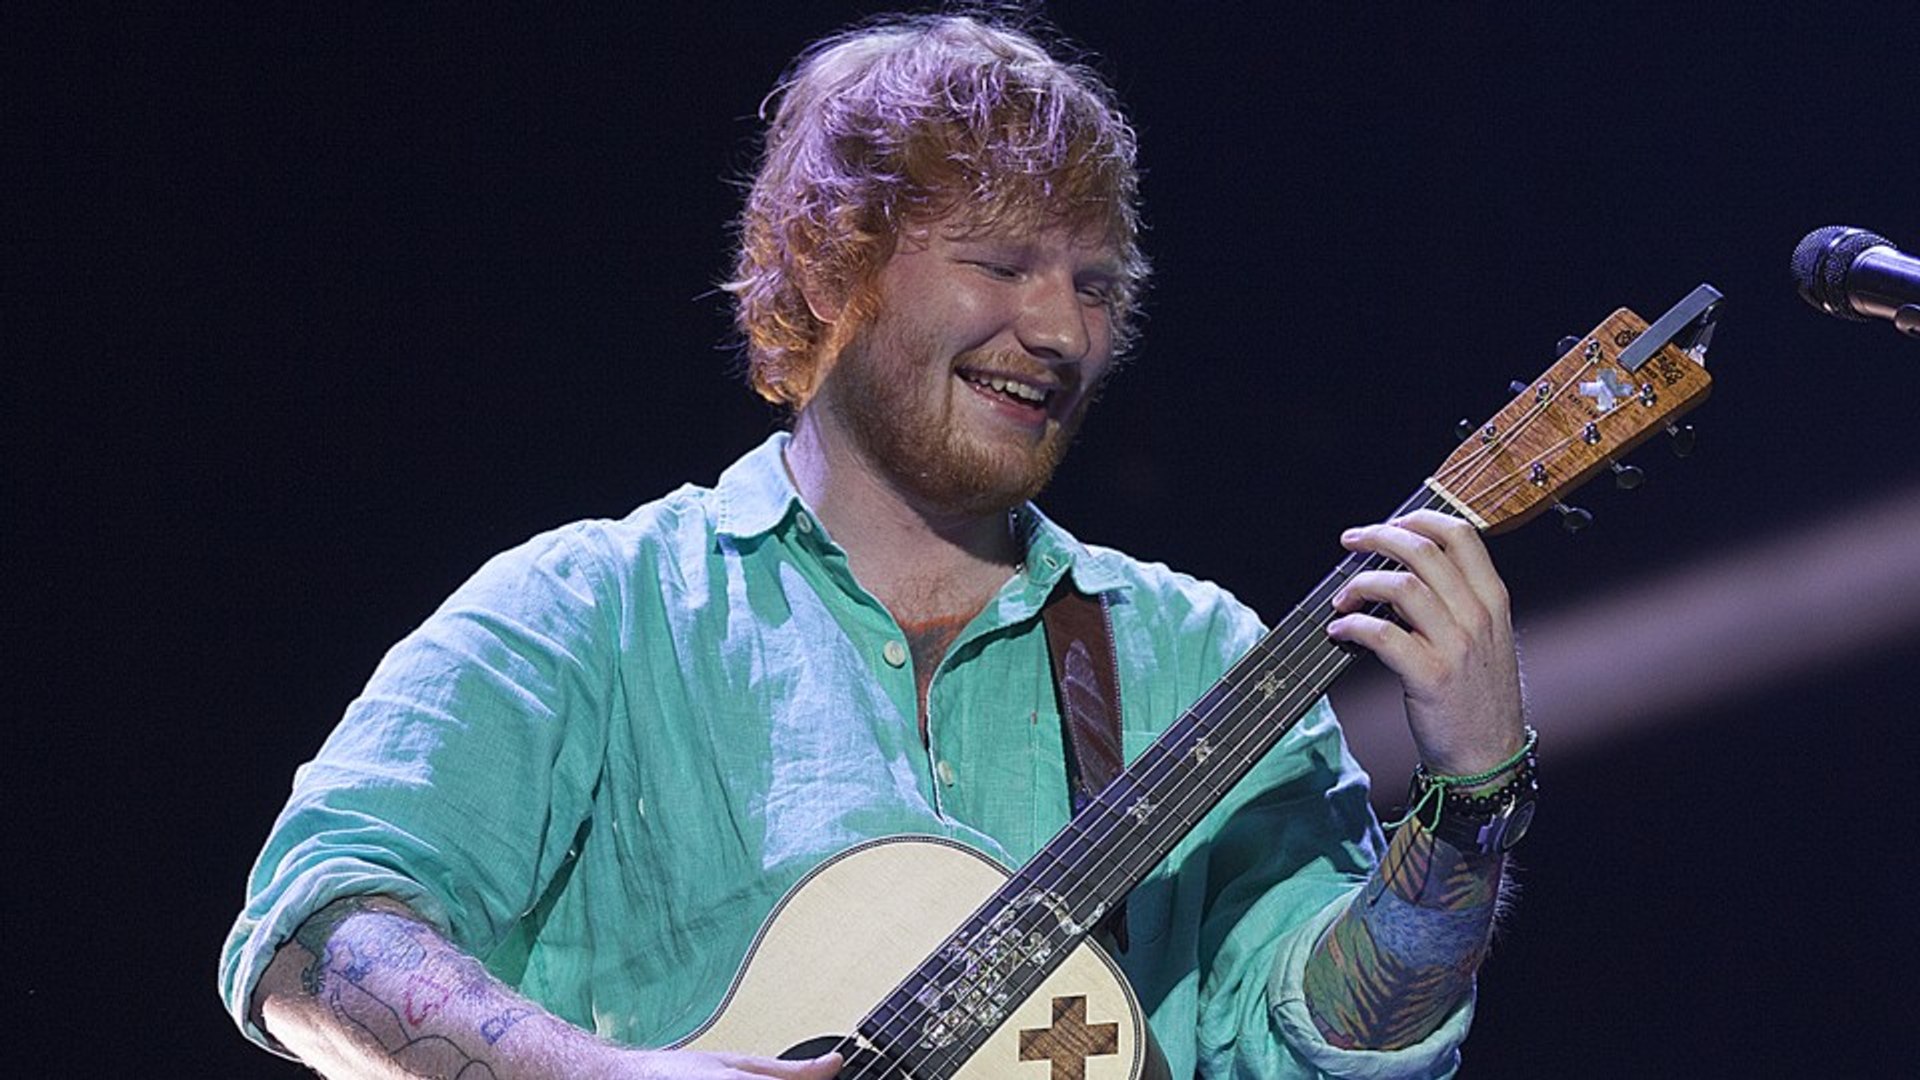 Ed Sheeran Wrote Better Song Than 'Thinking Out Loud'